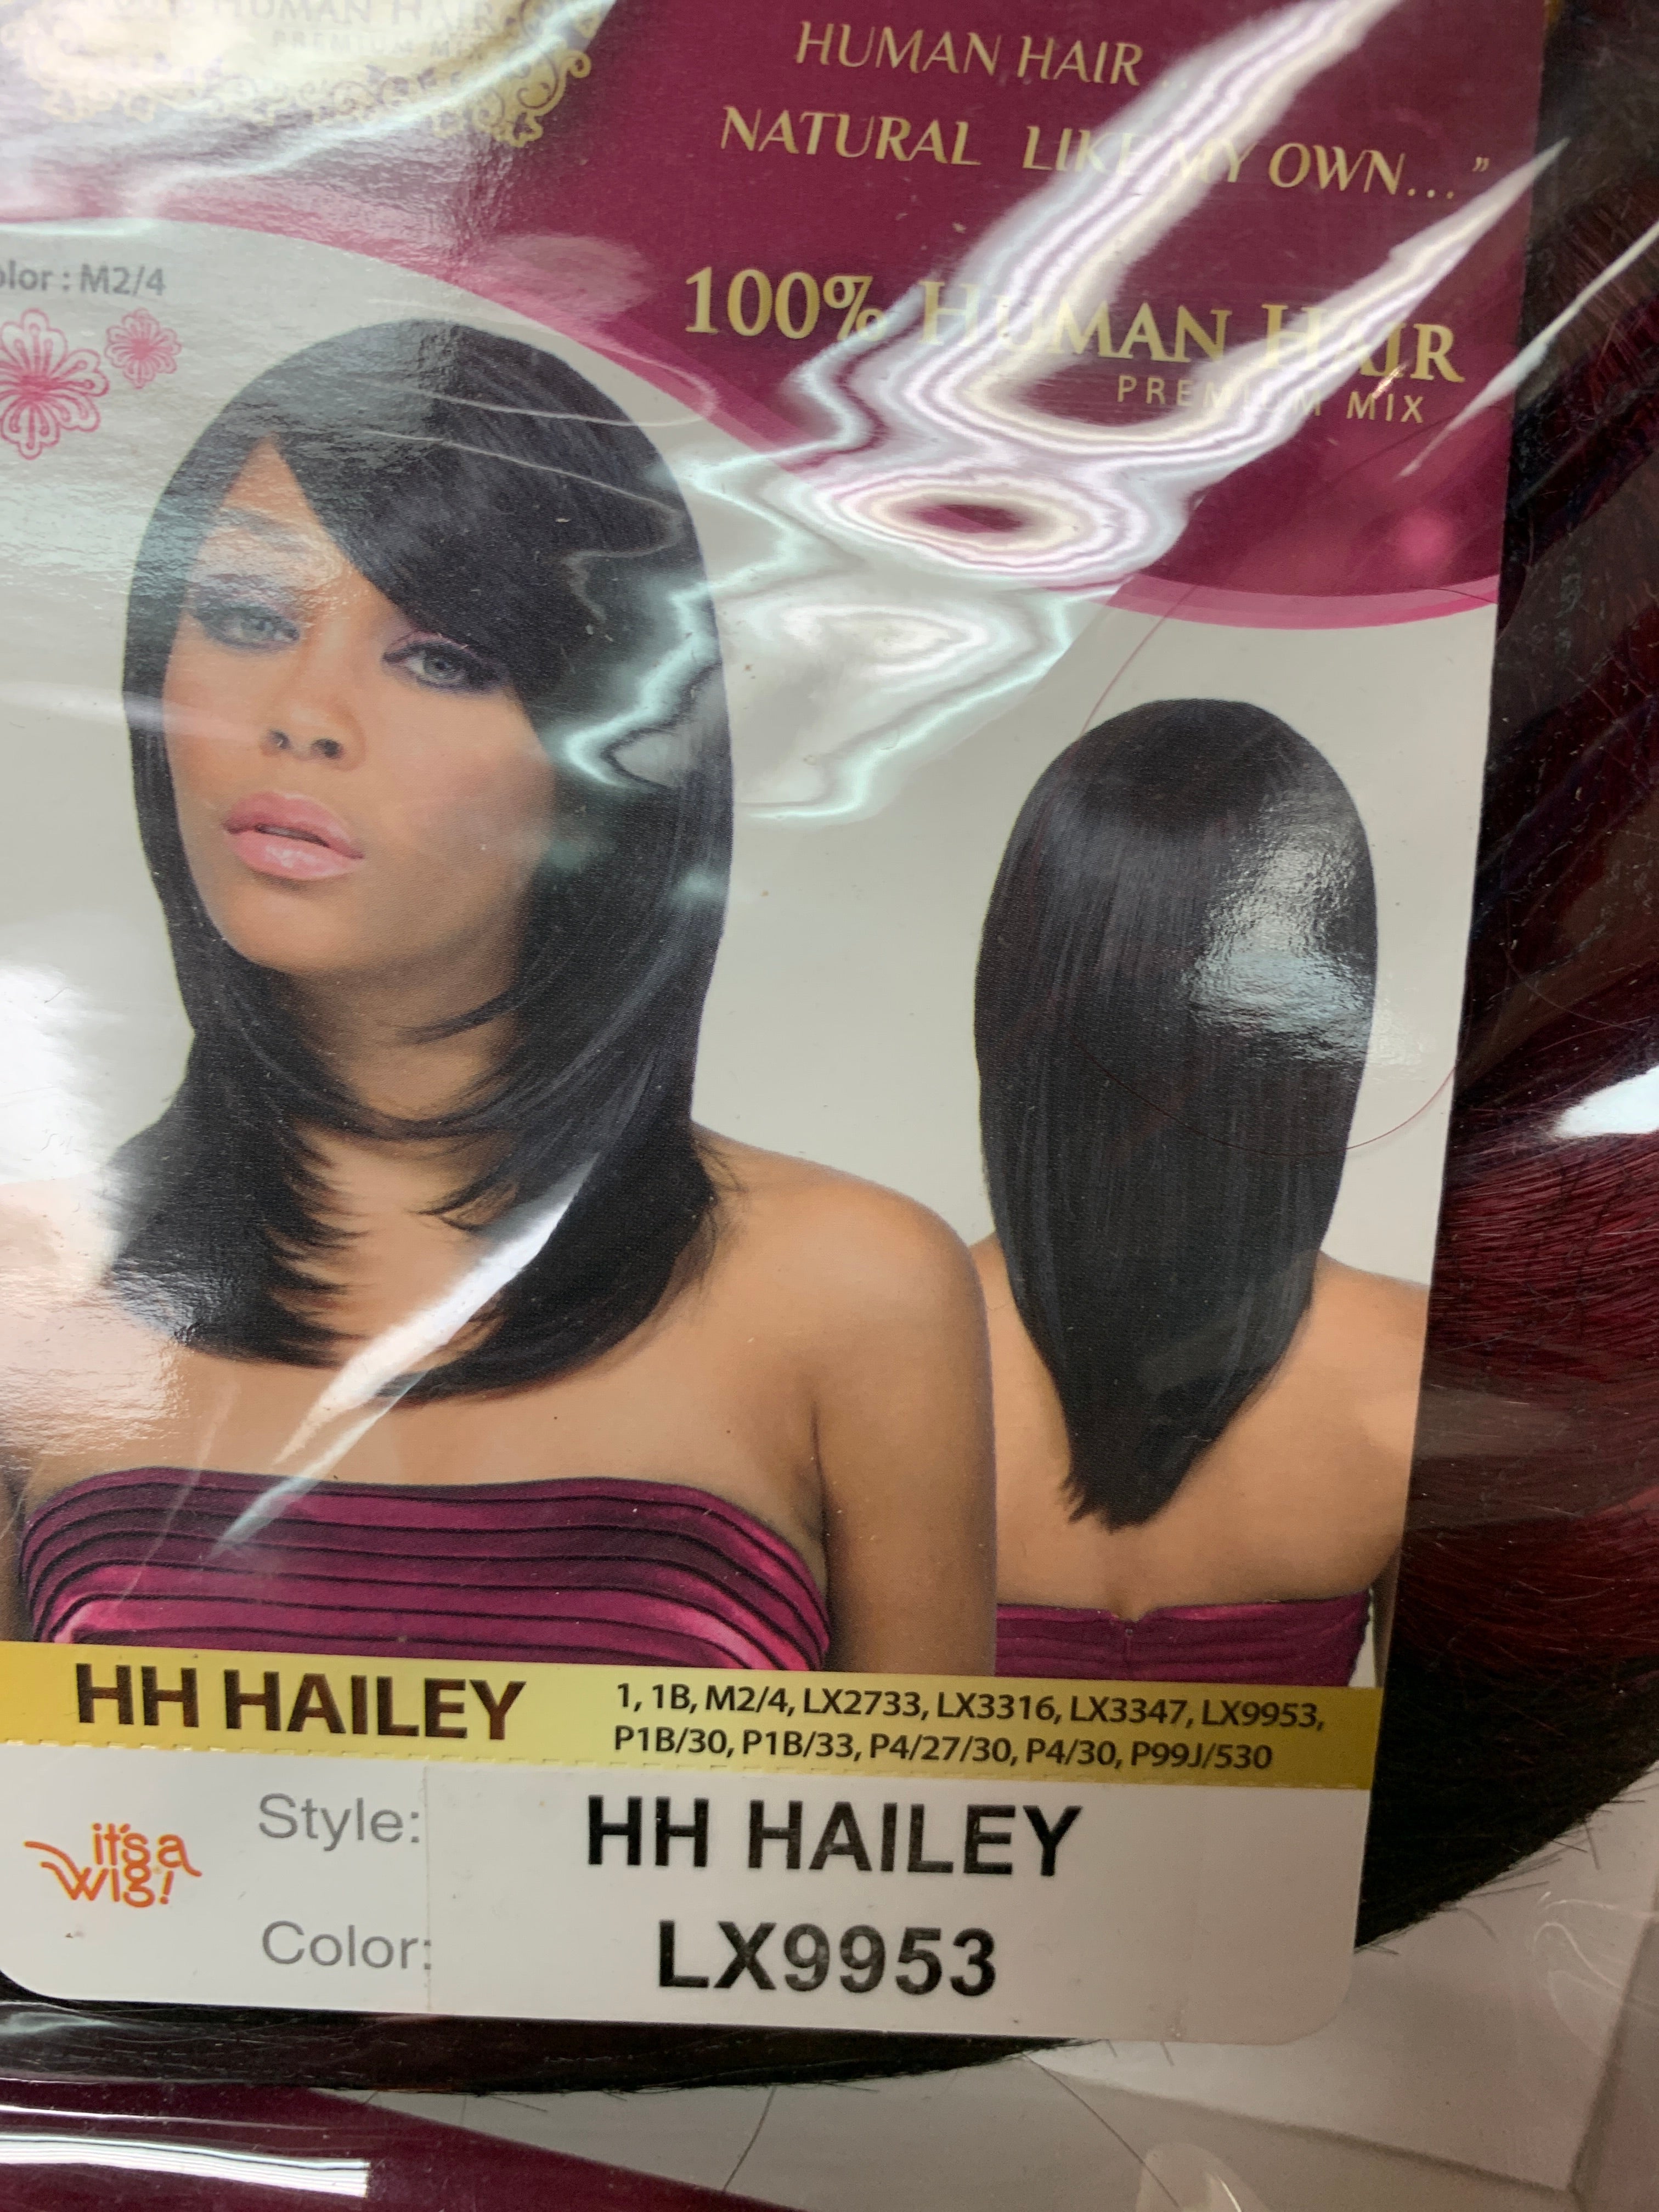 It’s a wig hh hailey